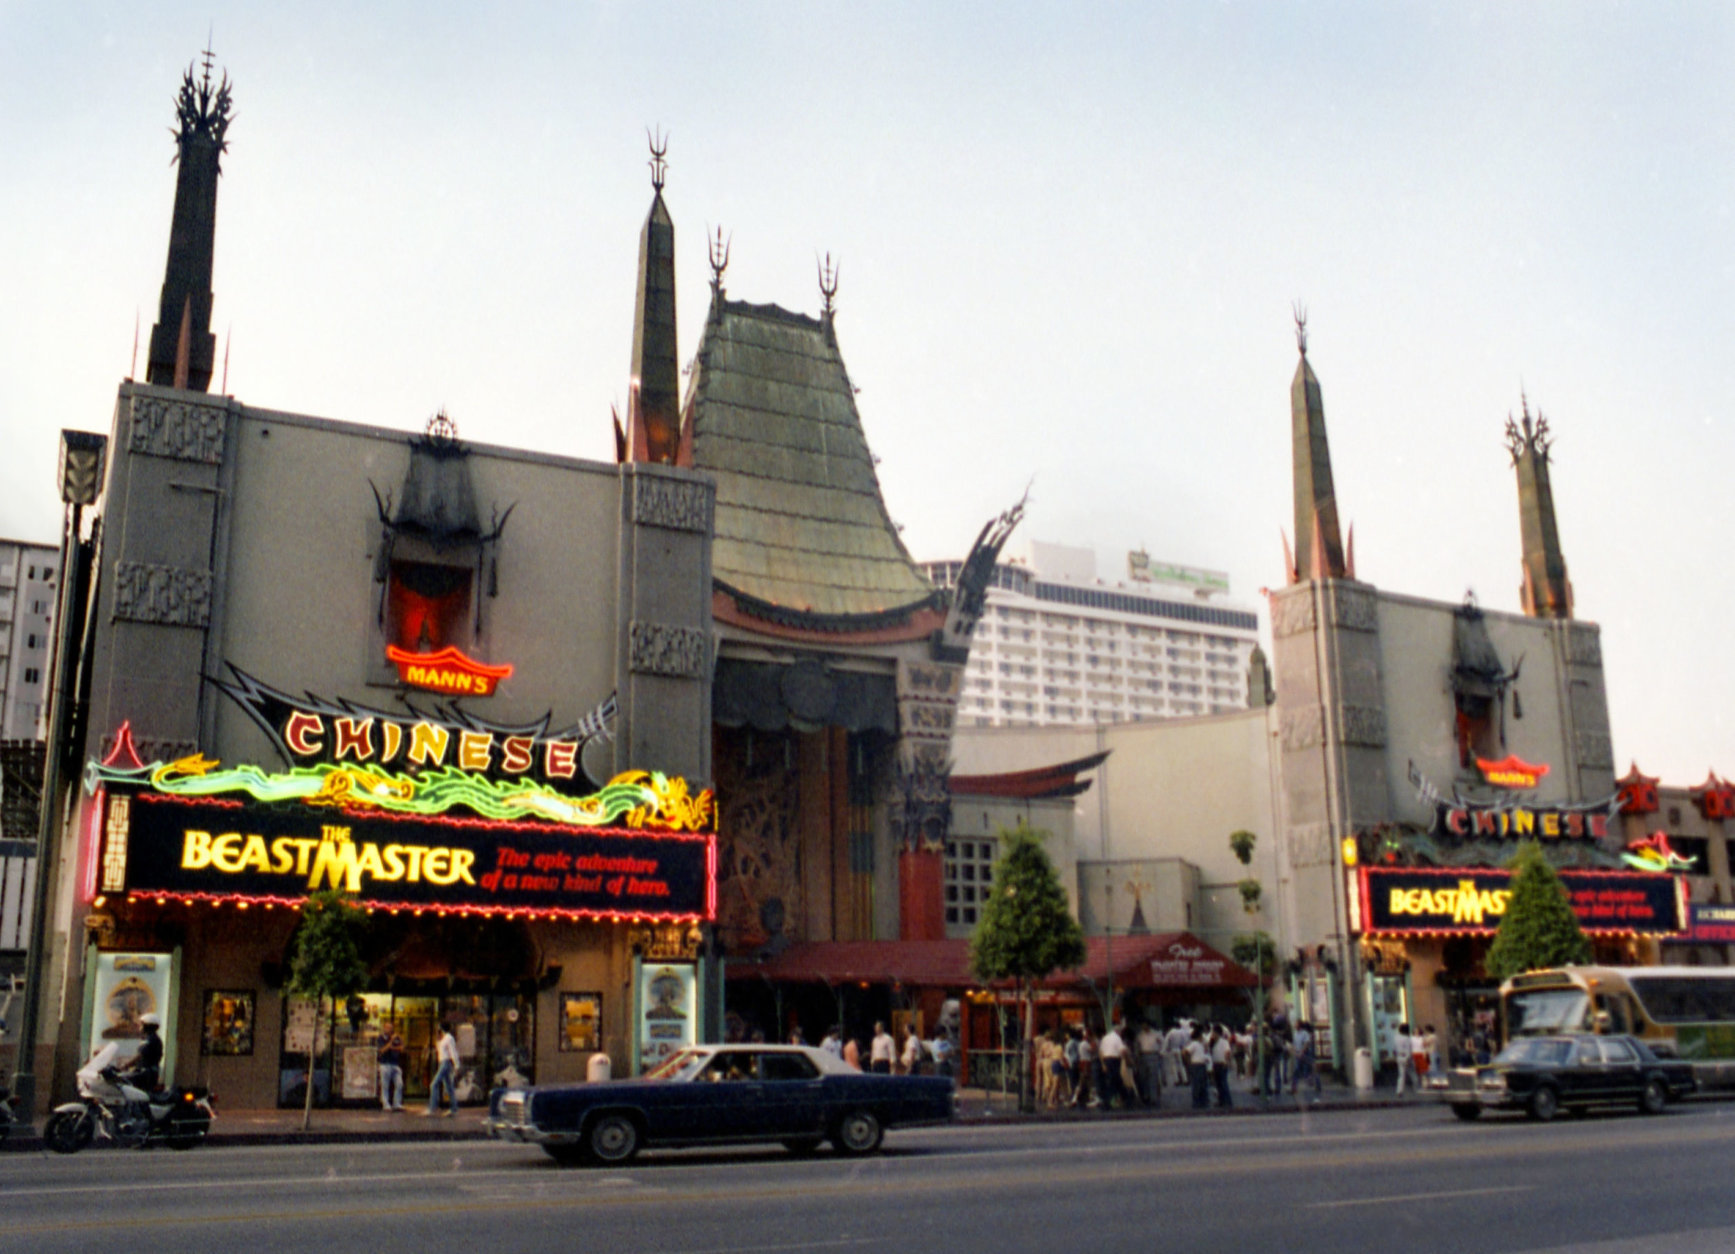 Coscarelli's "Beastmaster" on the marquee at the Chinese Theatre on Hollywood Boulevard. (Courtesy Silver Sphere Productions)